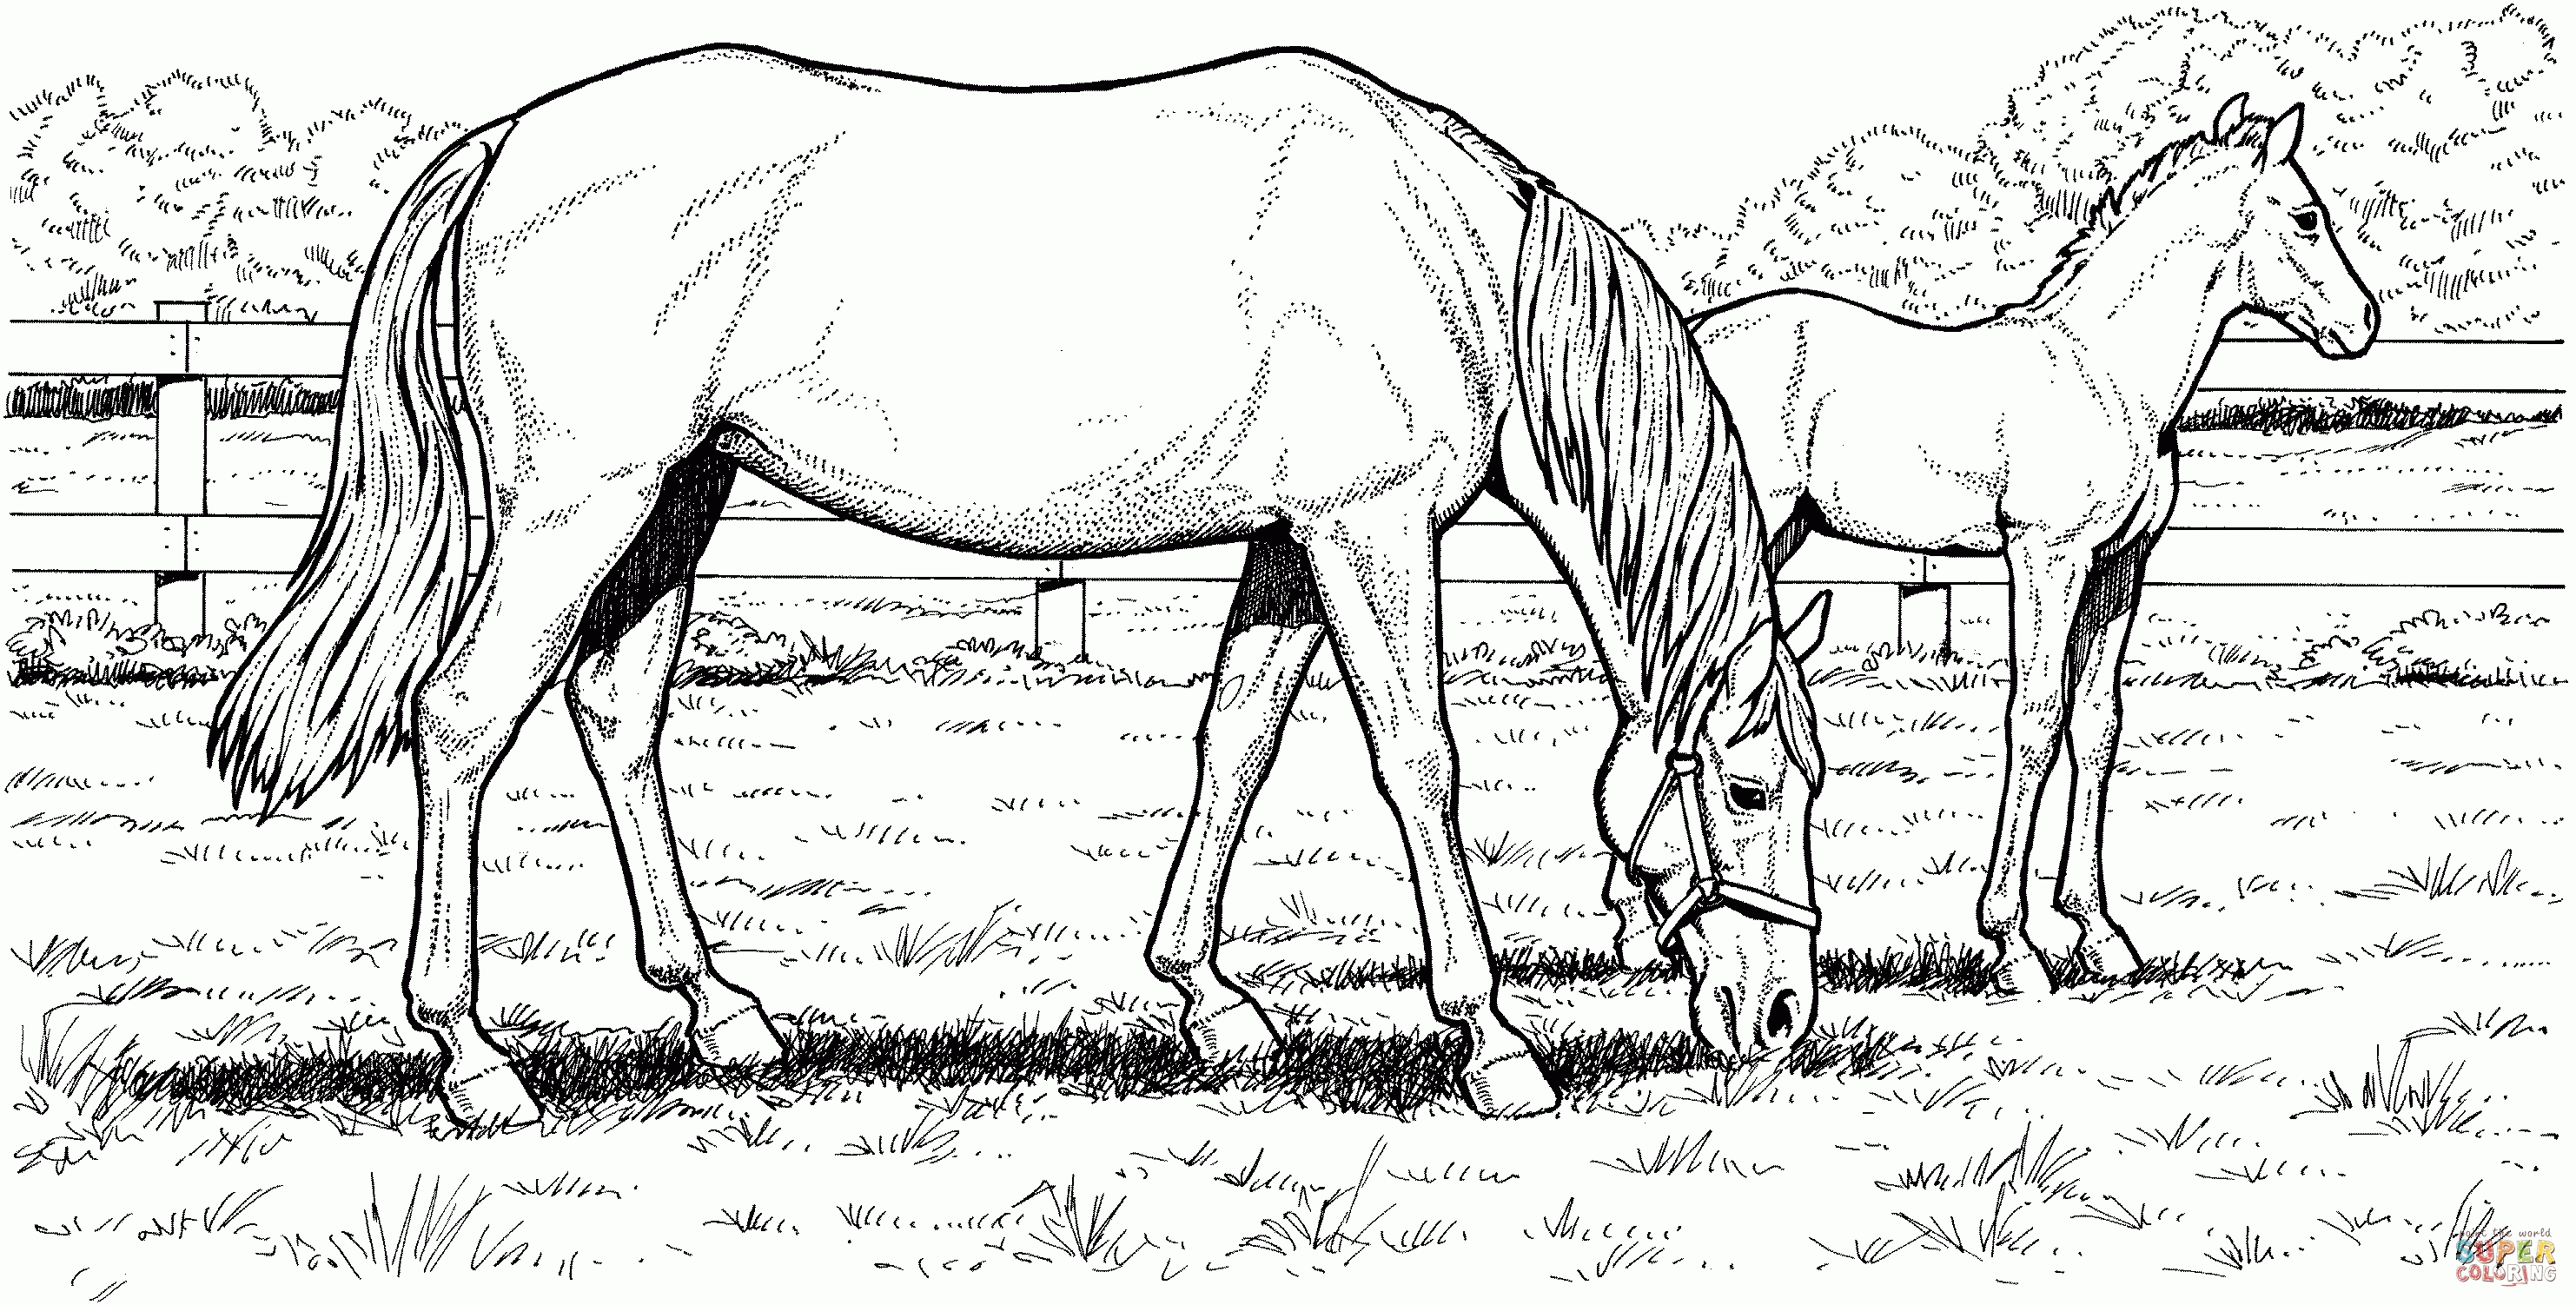 Free Printable Horse Coloring Pages For Adults - Coloring Home